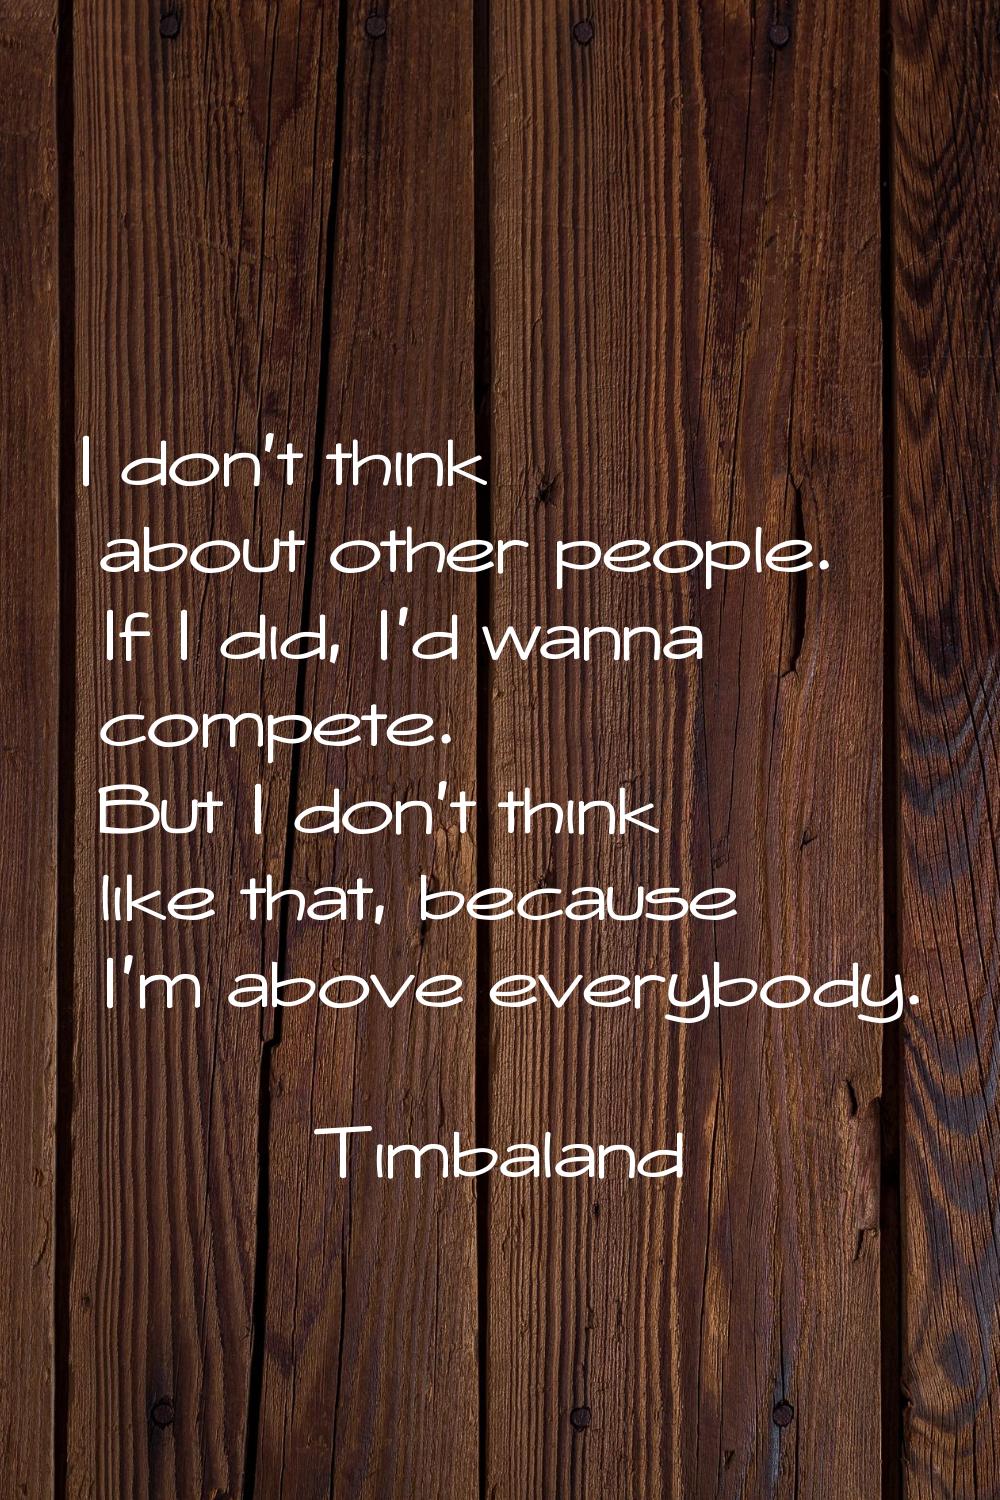 I don't think about other people. If I did, I'd wanna compete. But I don't think like that, because